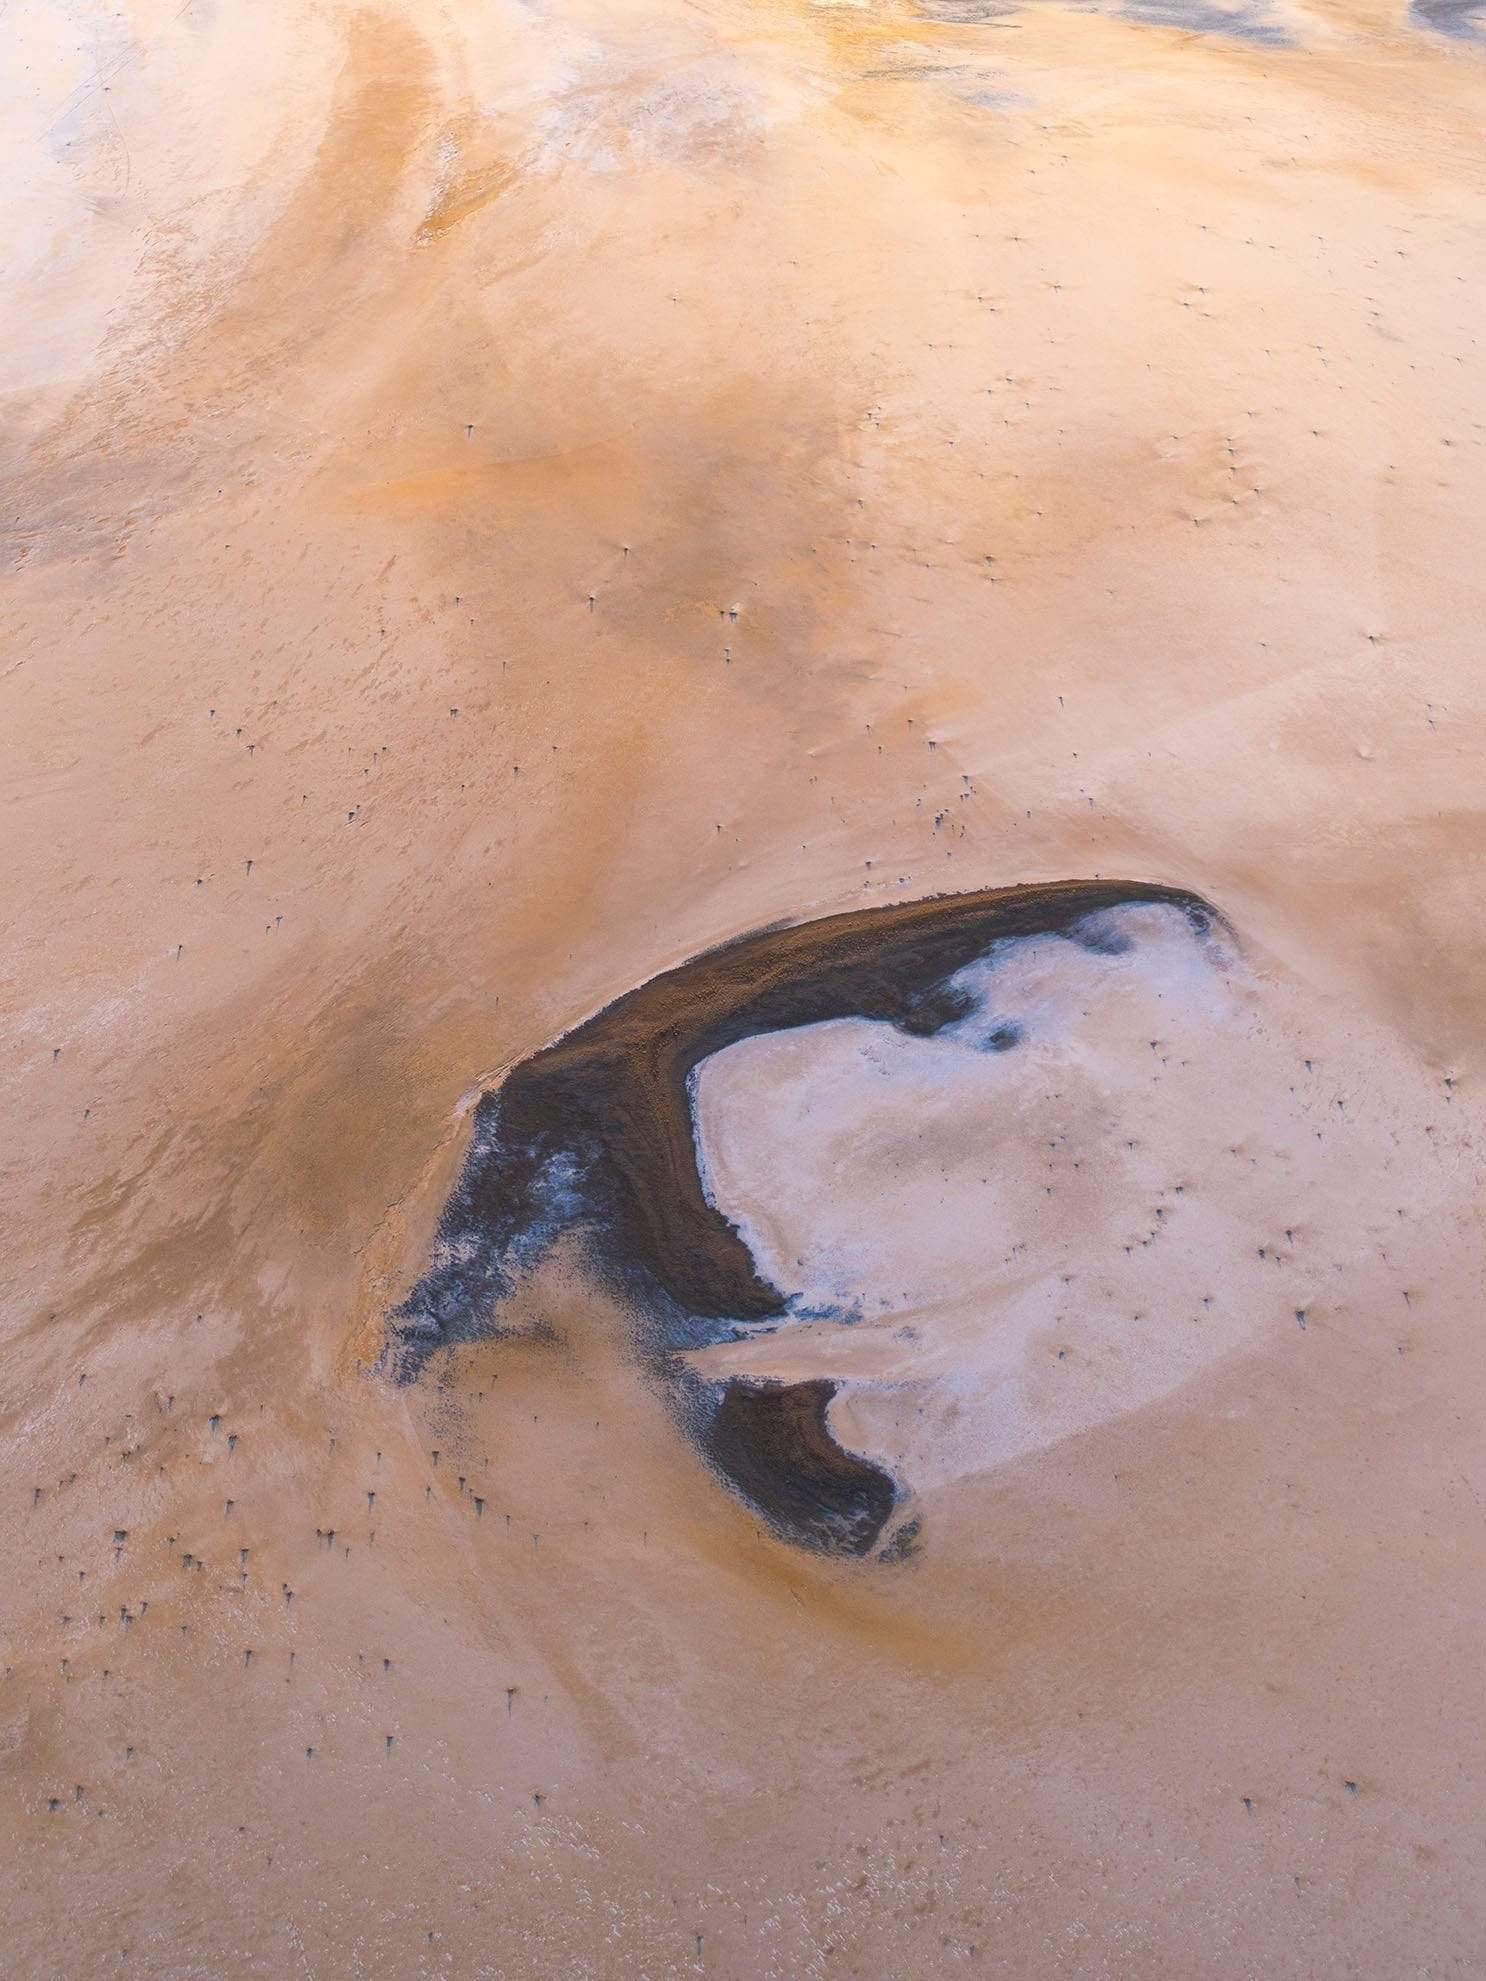 Large desert-like land with chocolate and smoky-colored mound depicting like ice-cream, Boomerang